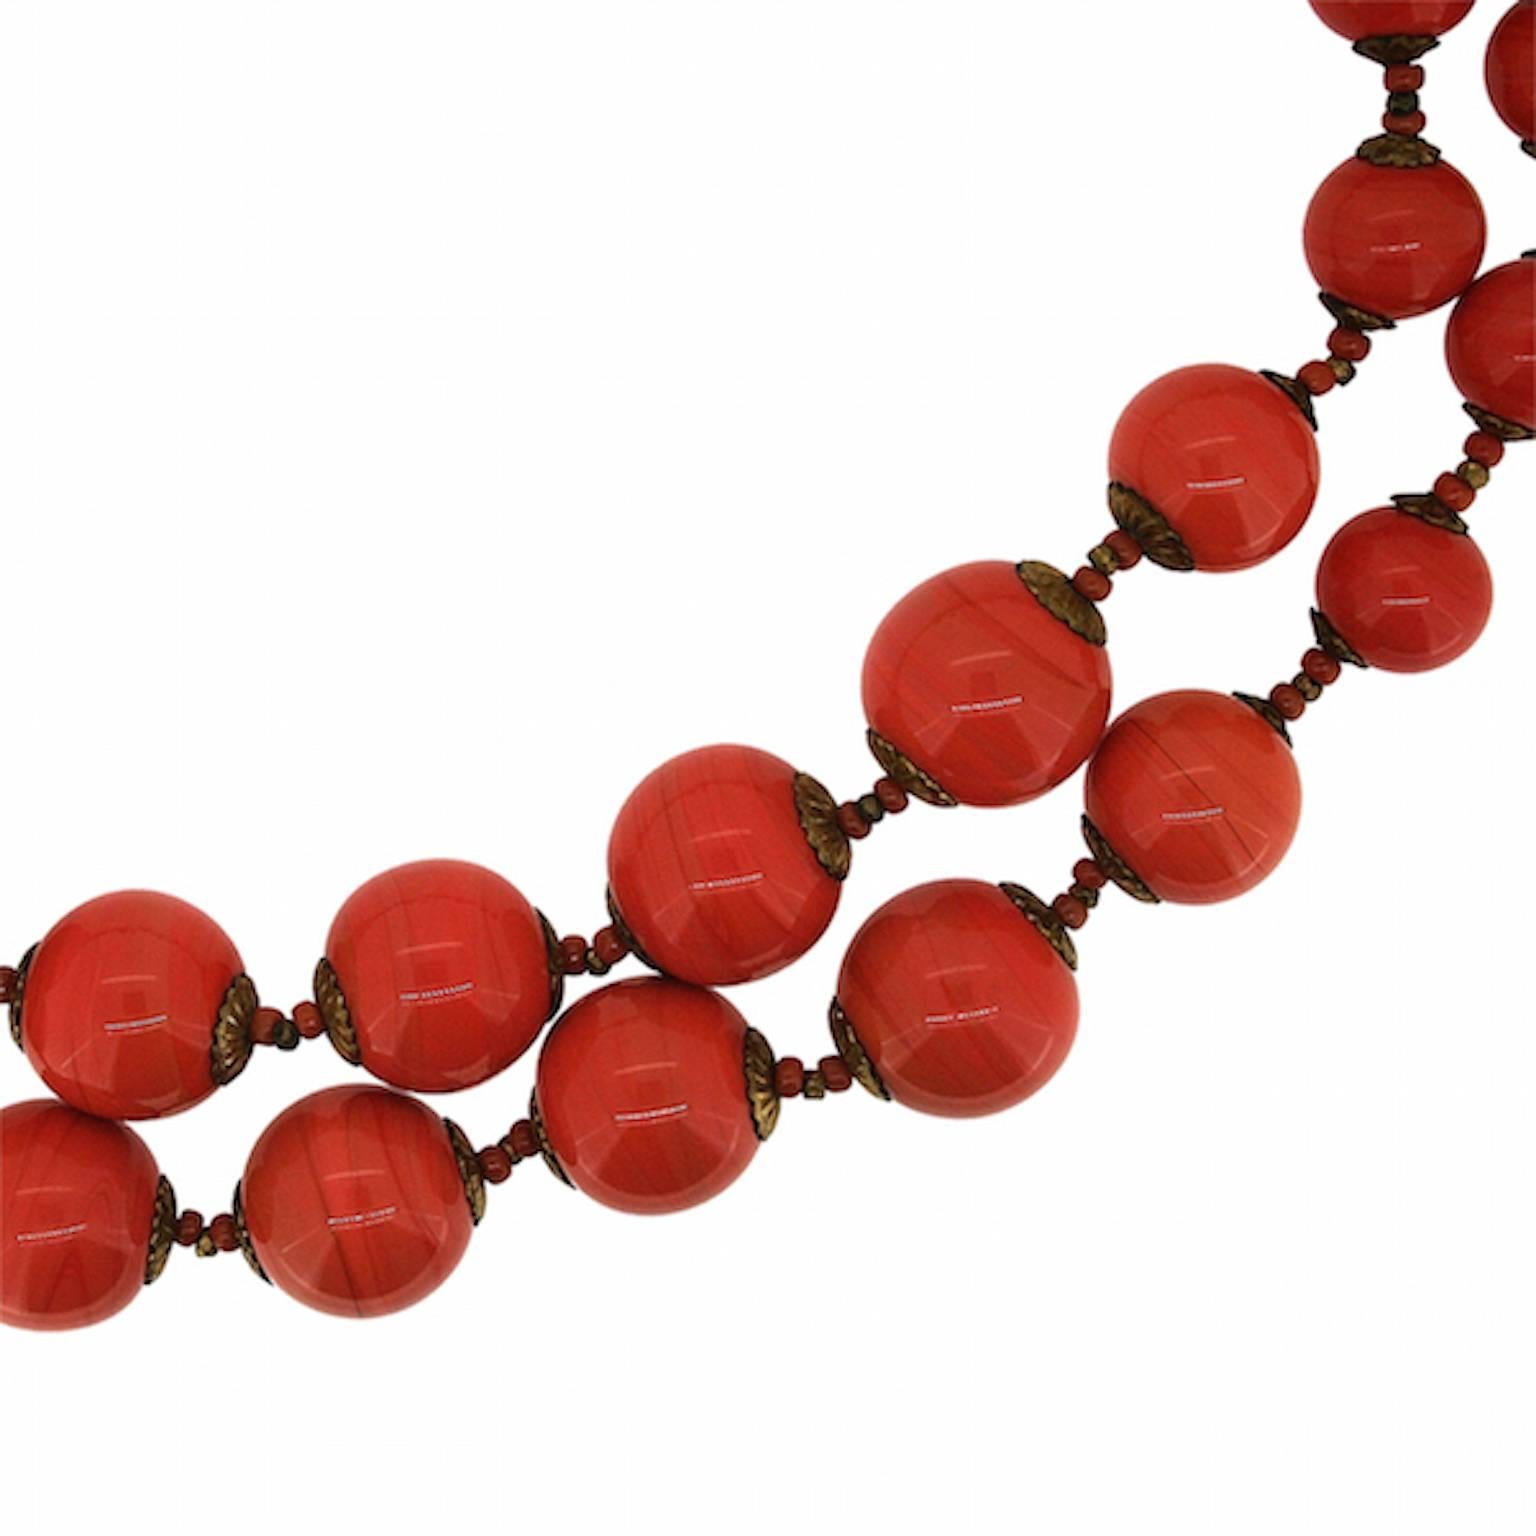 Women's Miriam Haskell 1960s Coral Glass Bead Vintage Necklace For Sale